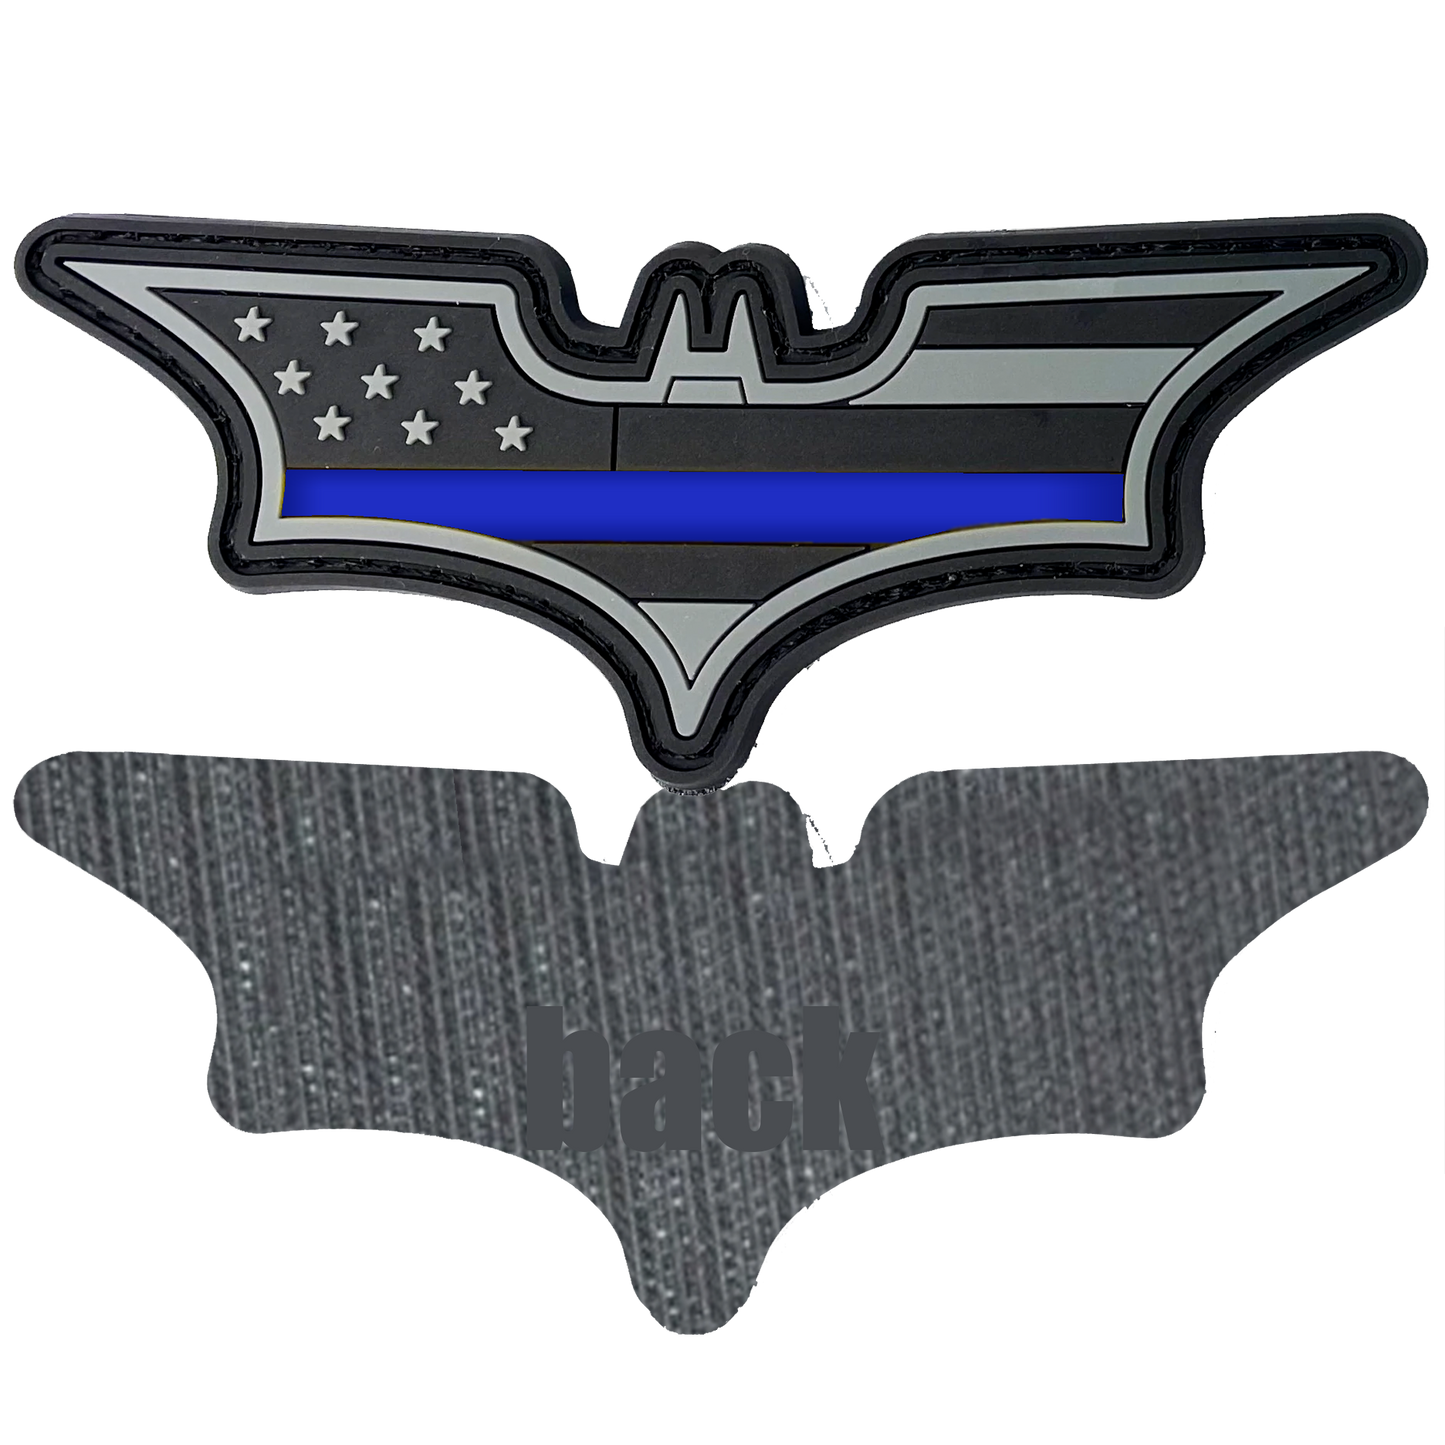 Bat PVC Patch hook and loop back Thin Blue Line Police CL4-11